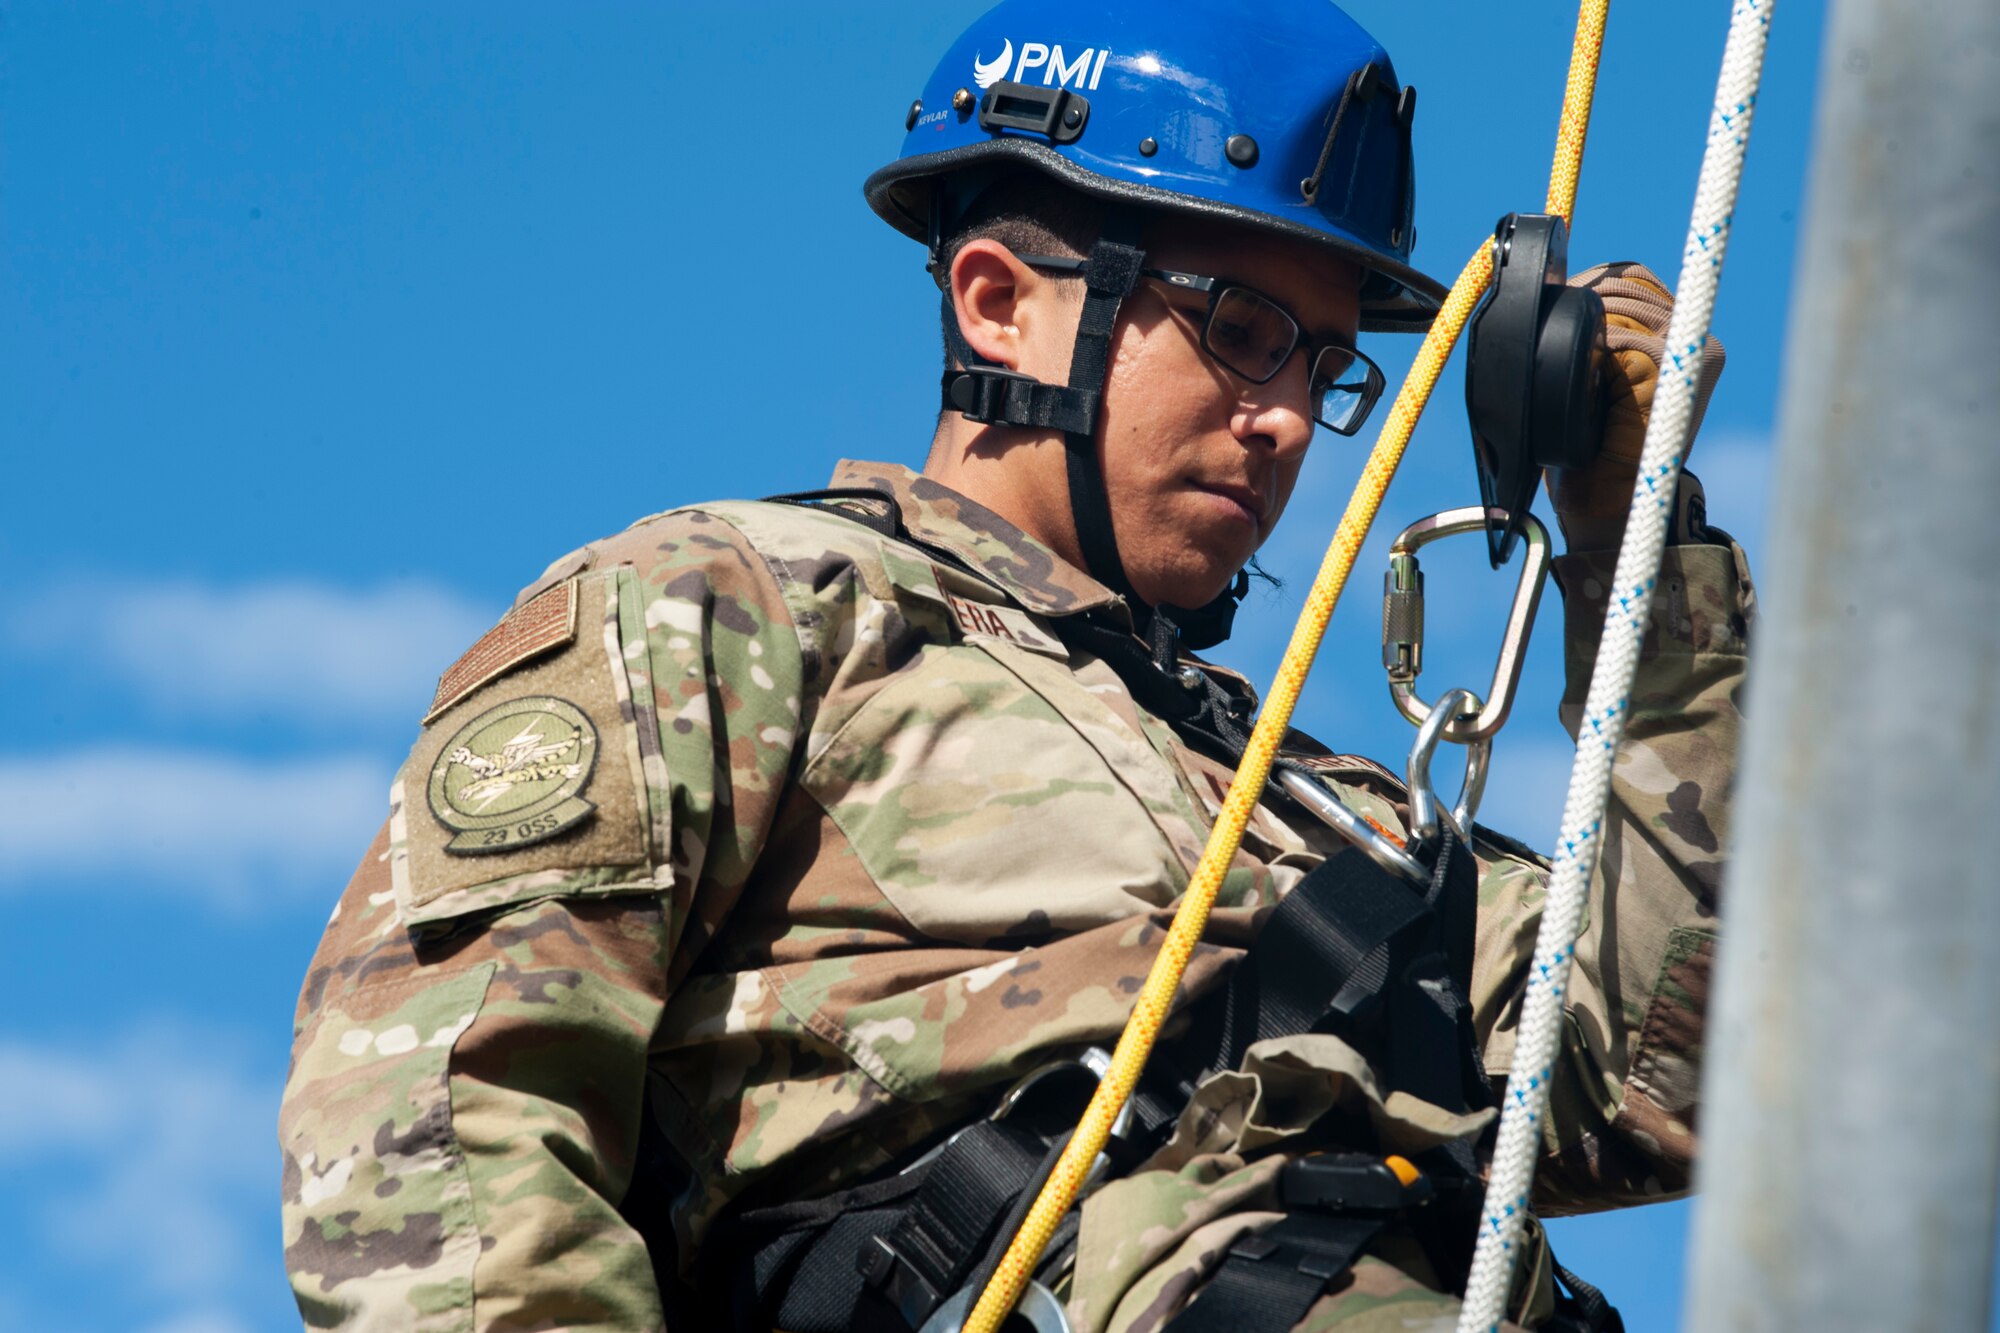 A photo of an Airman rappelling from a radio tower